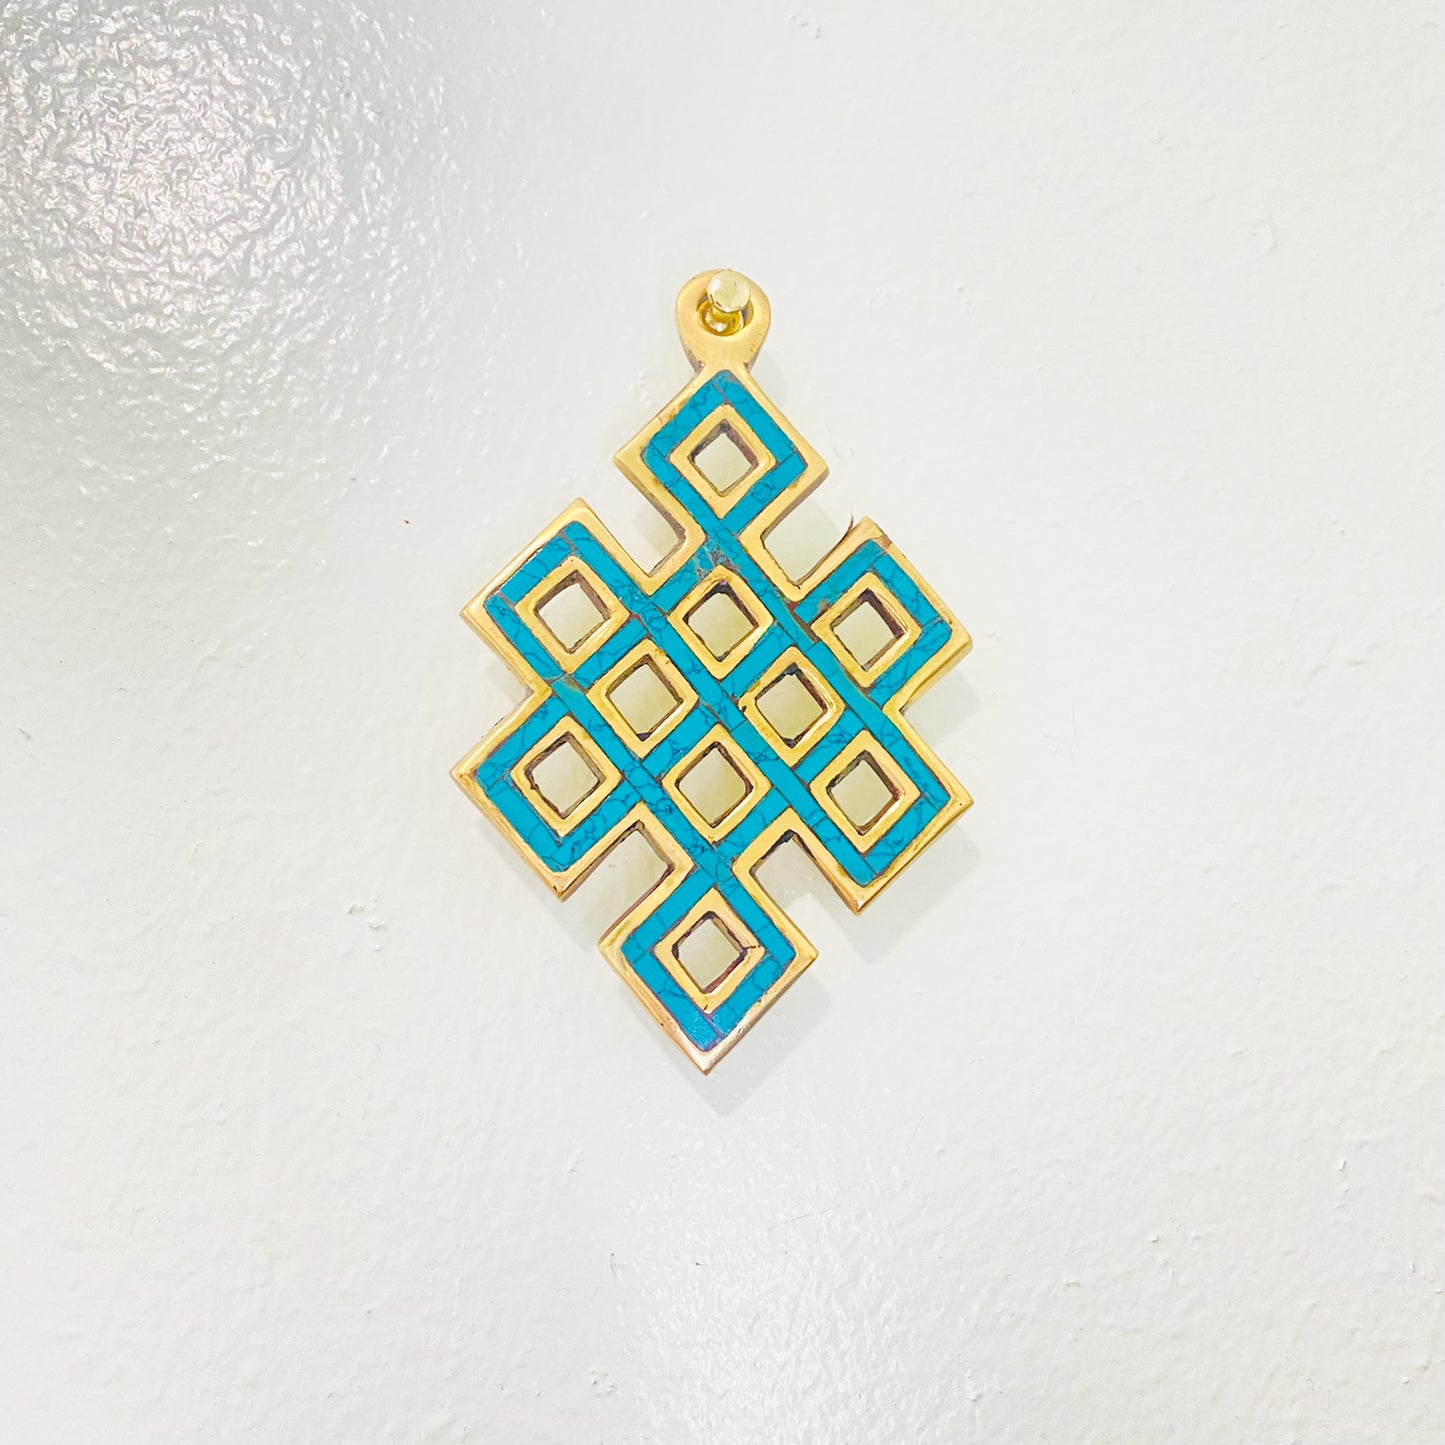 Metal Infinity Hanging, Turquoise Endless Knot Wall Decor, Minimalistic Home Decor, Handmade Wall Hanging, Brass Wall Decor, Good Luck Gifts